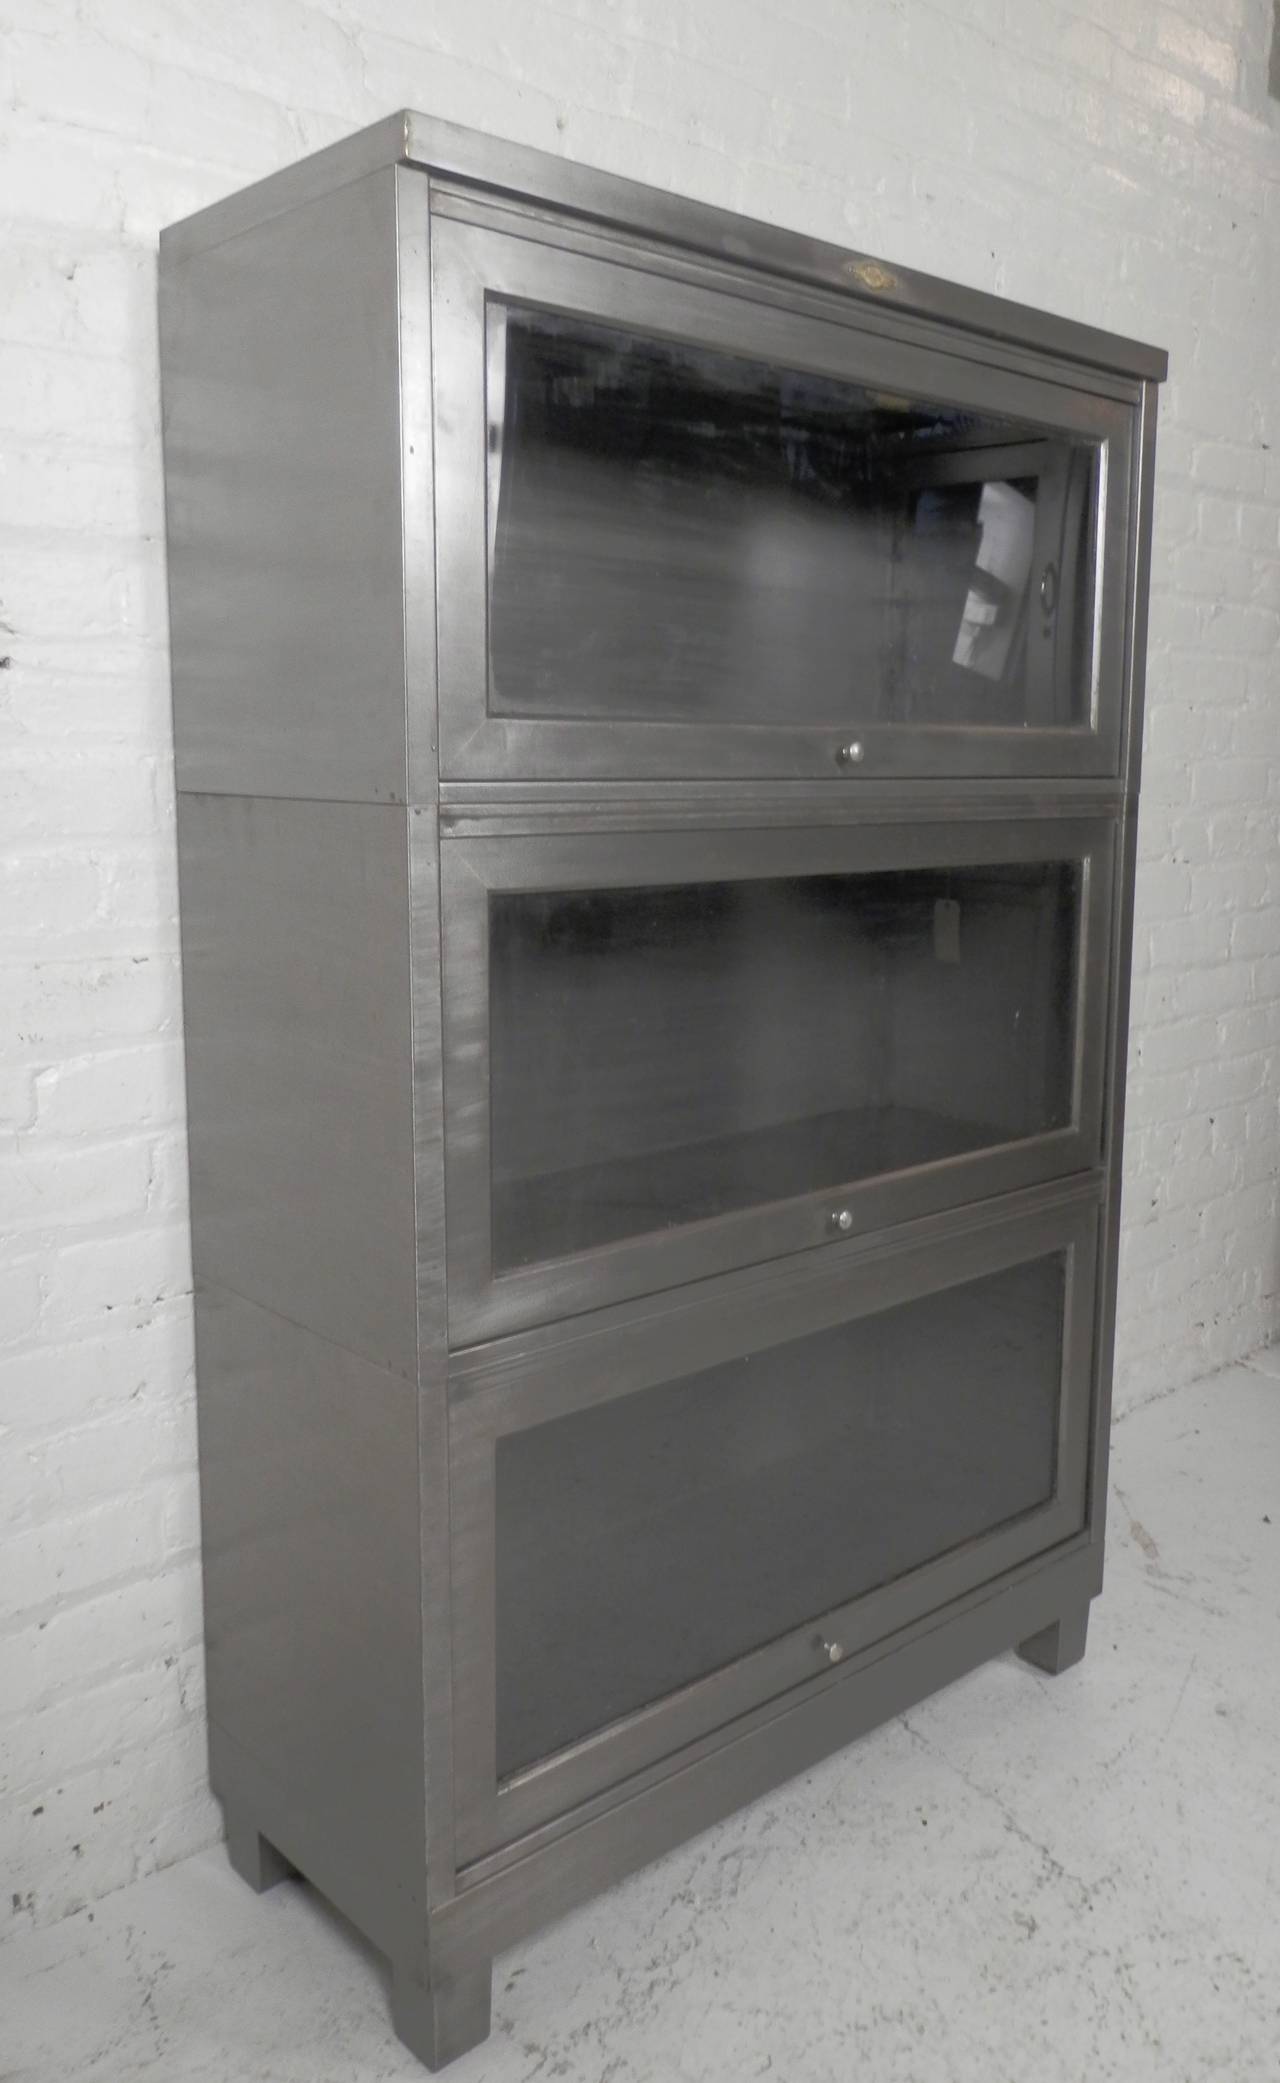 Vintage lawyers stack bookcase, refinished in a bare metal style. Three glass front cabinets that recede into the unit. Originally used by lawyers to protect their law books, now restored for your modern home.

(Please confirm item location - NY